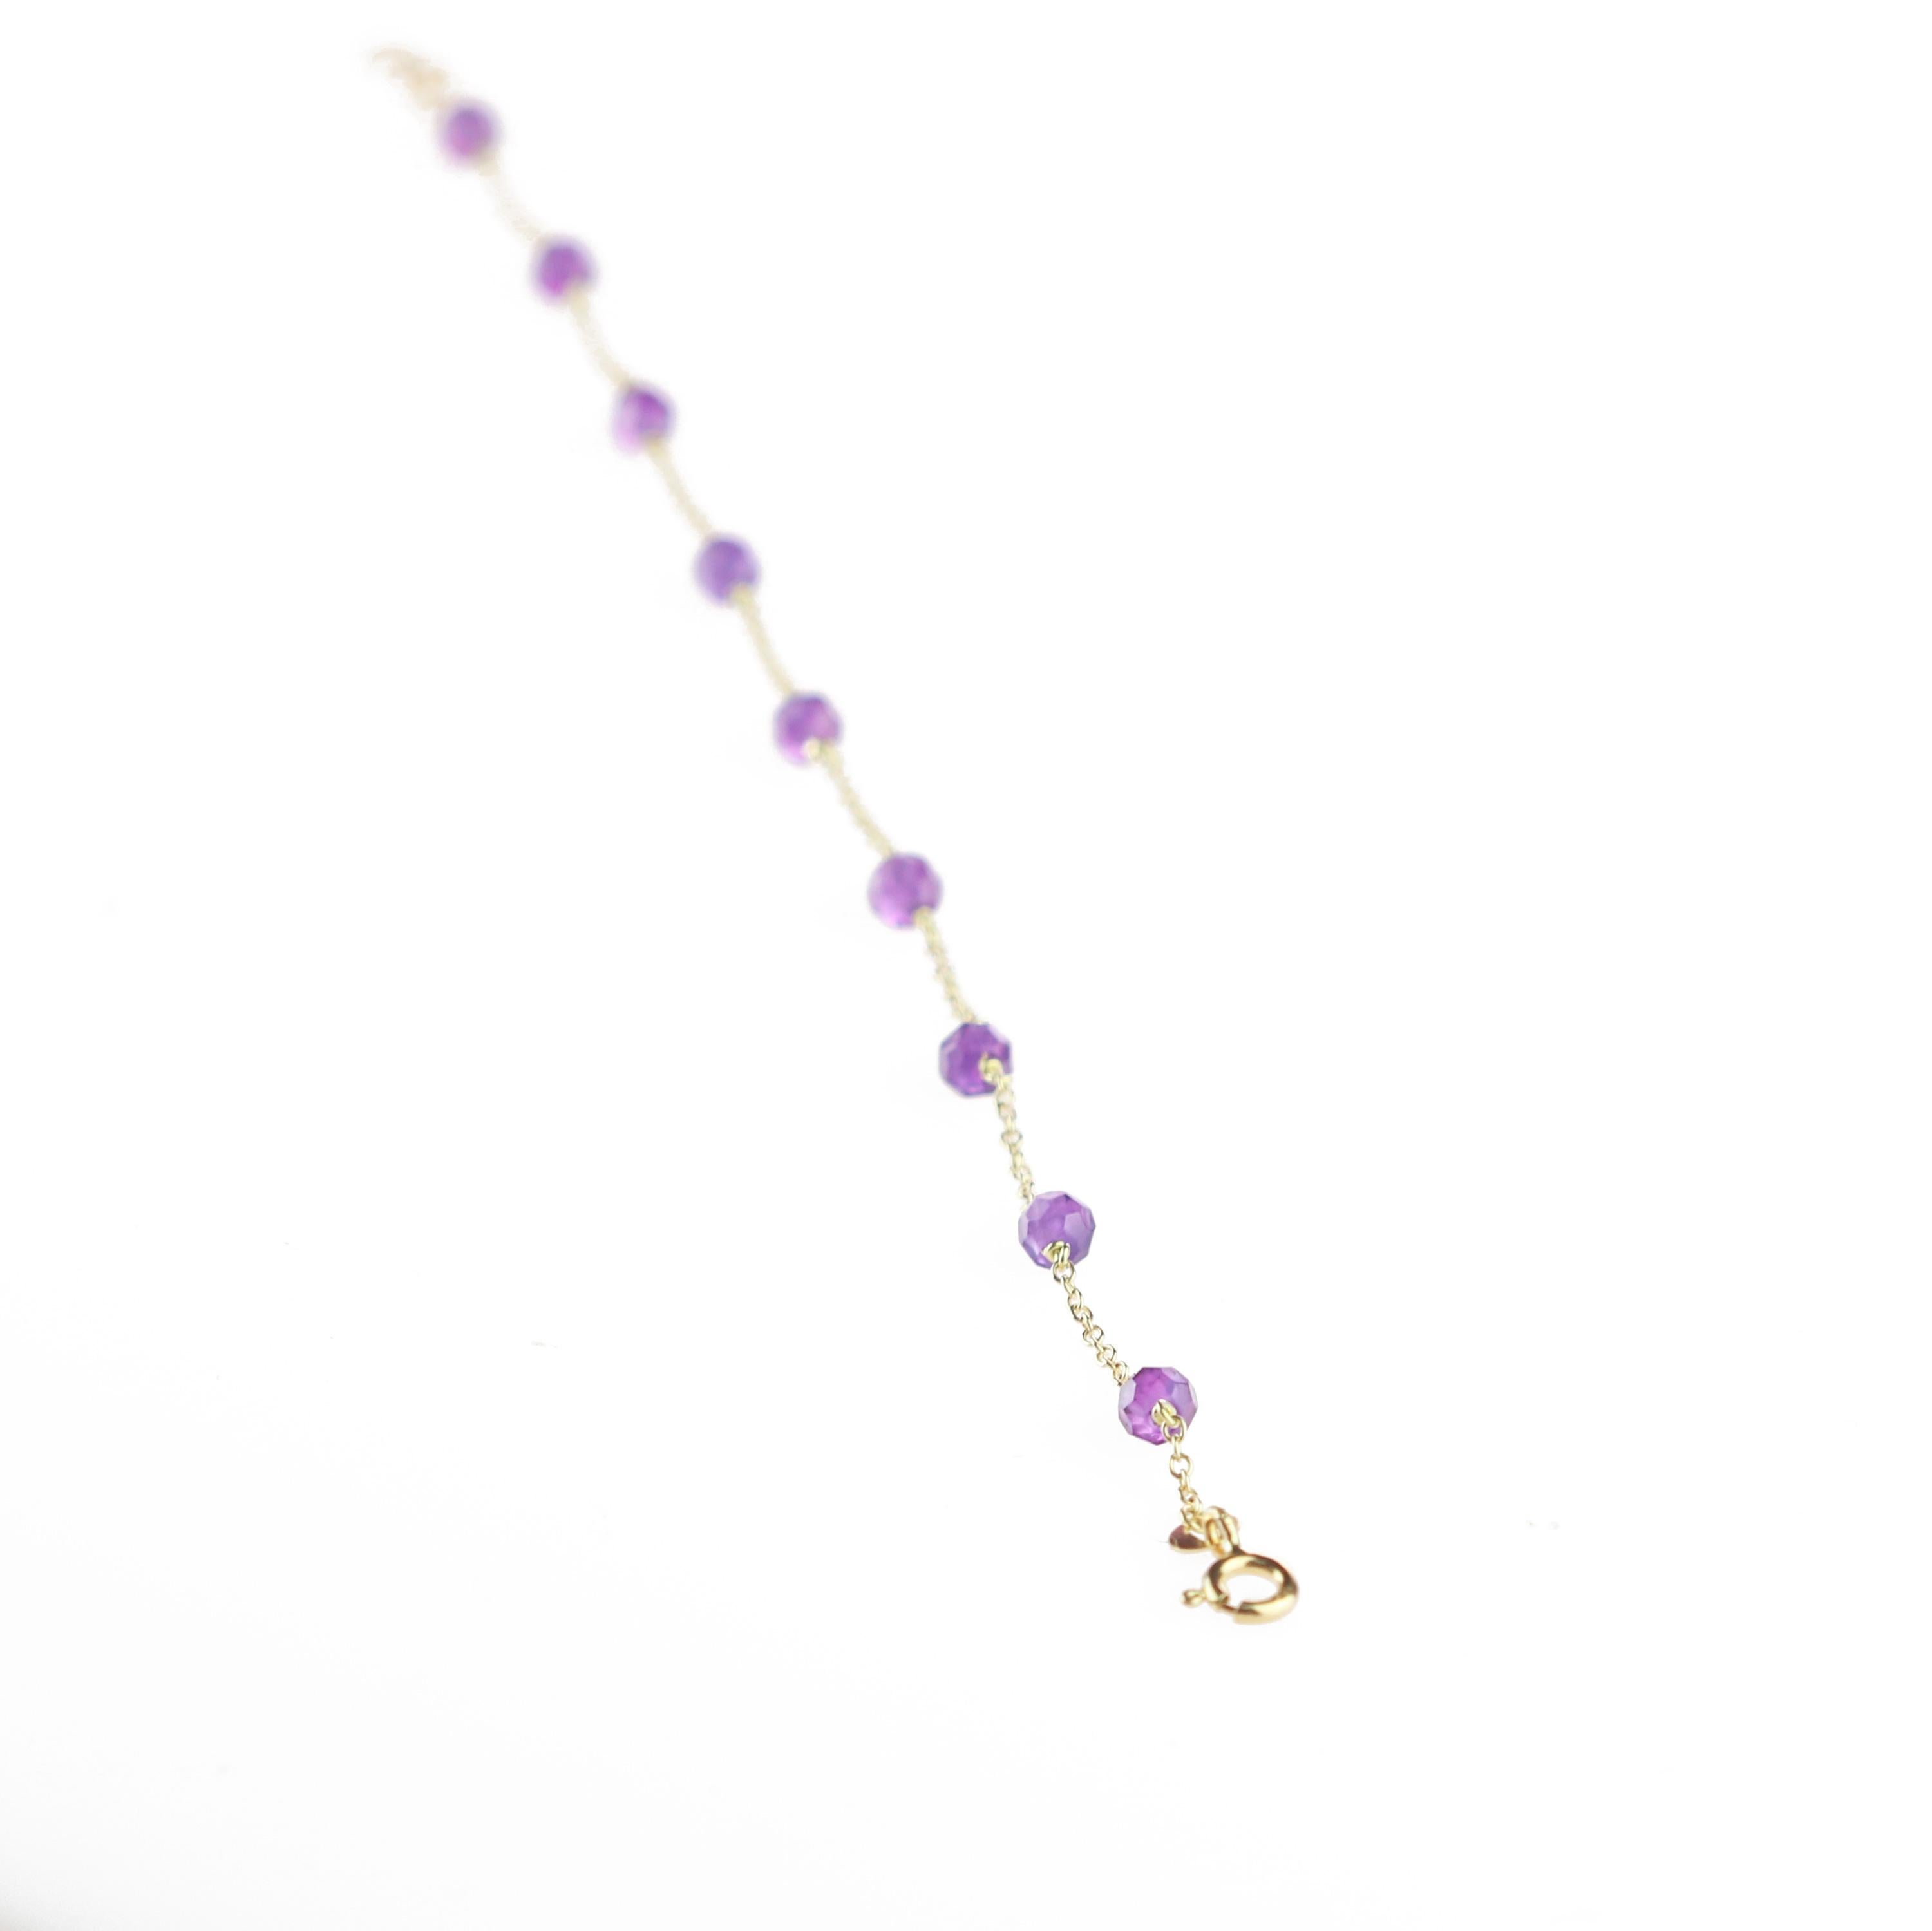 Round Cut Intini Jewels Gold Plate Chain Amethyst Rondelles Handmade Cocktail Bracelet For Sale